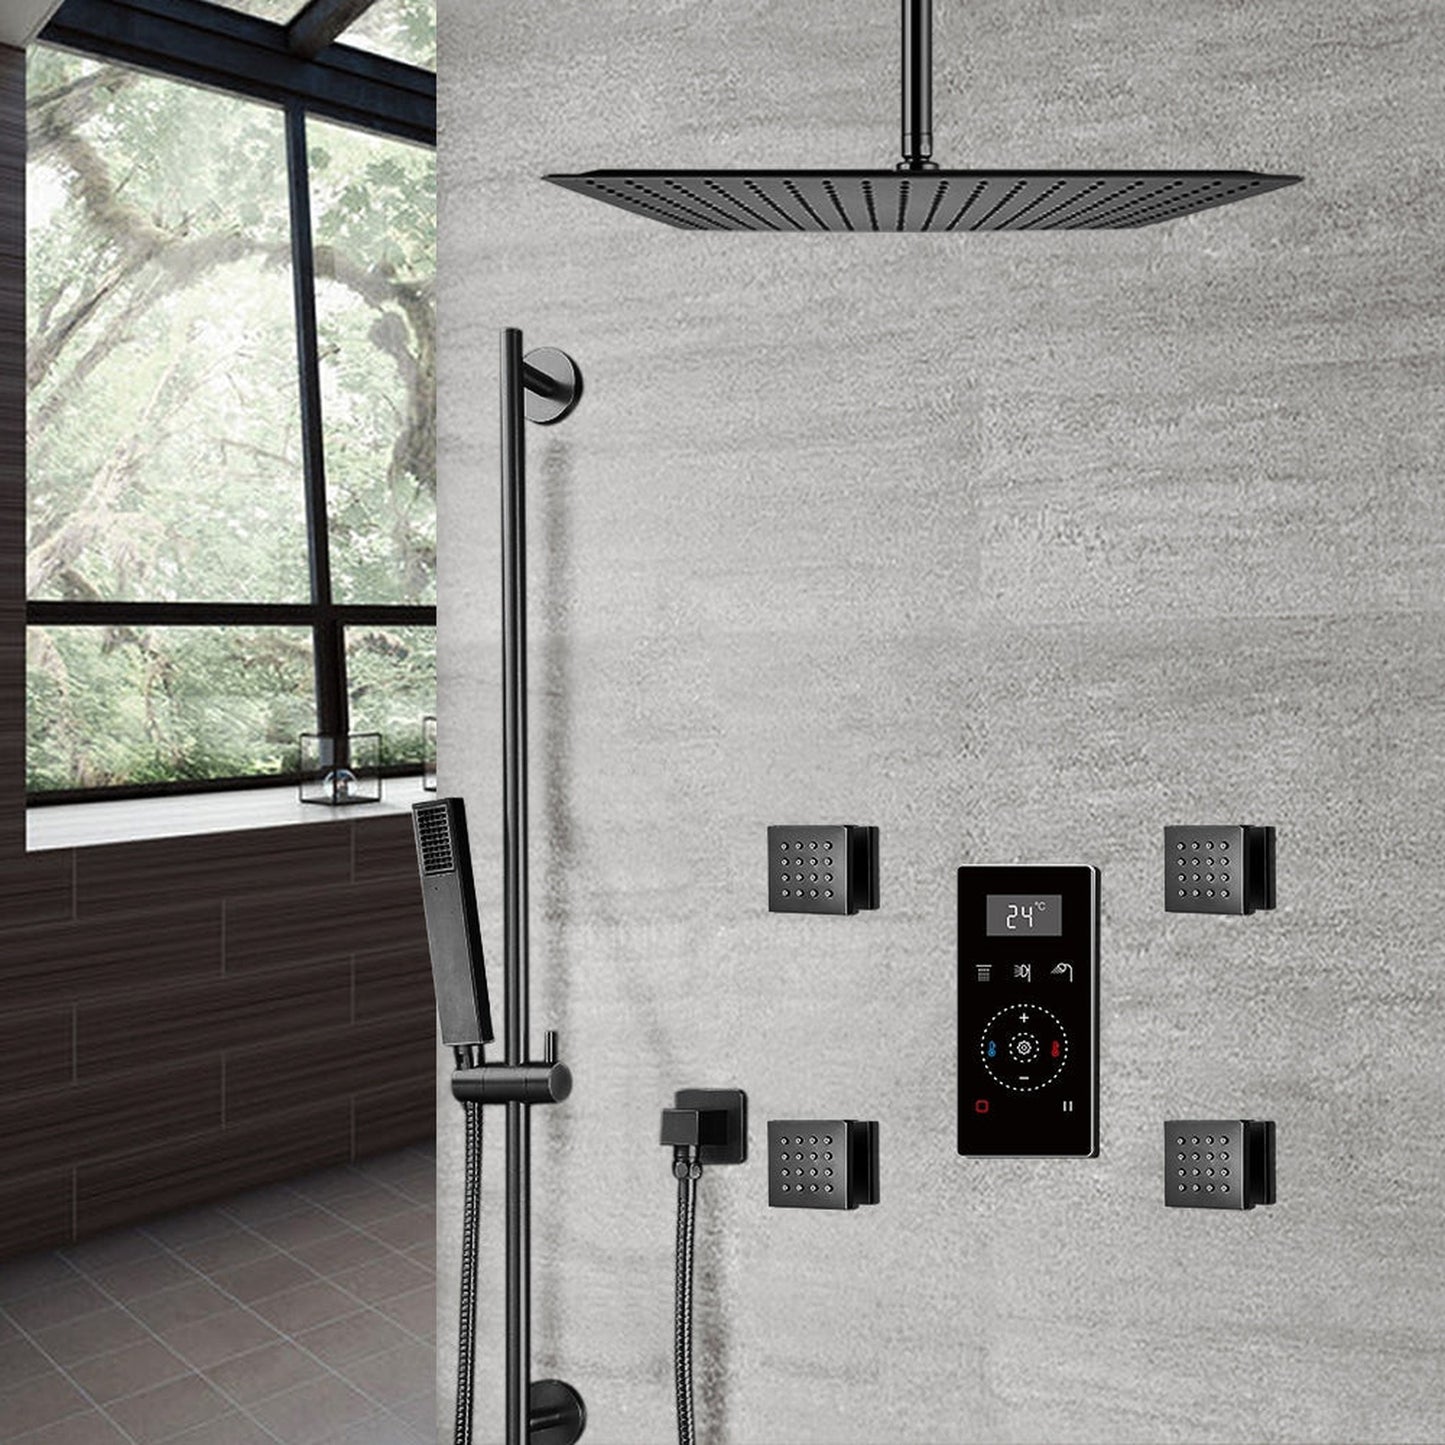 Fontana 8" Matte Black Ceiling Mounted Thermostatic Massage Shower Digital Touch Screen Shower Mixer Display 3-Function Rainfall Shower System With Hand Shower and 4-Jet Body Sprays